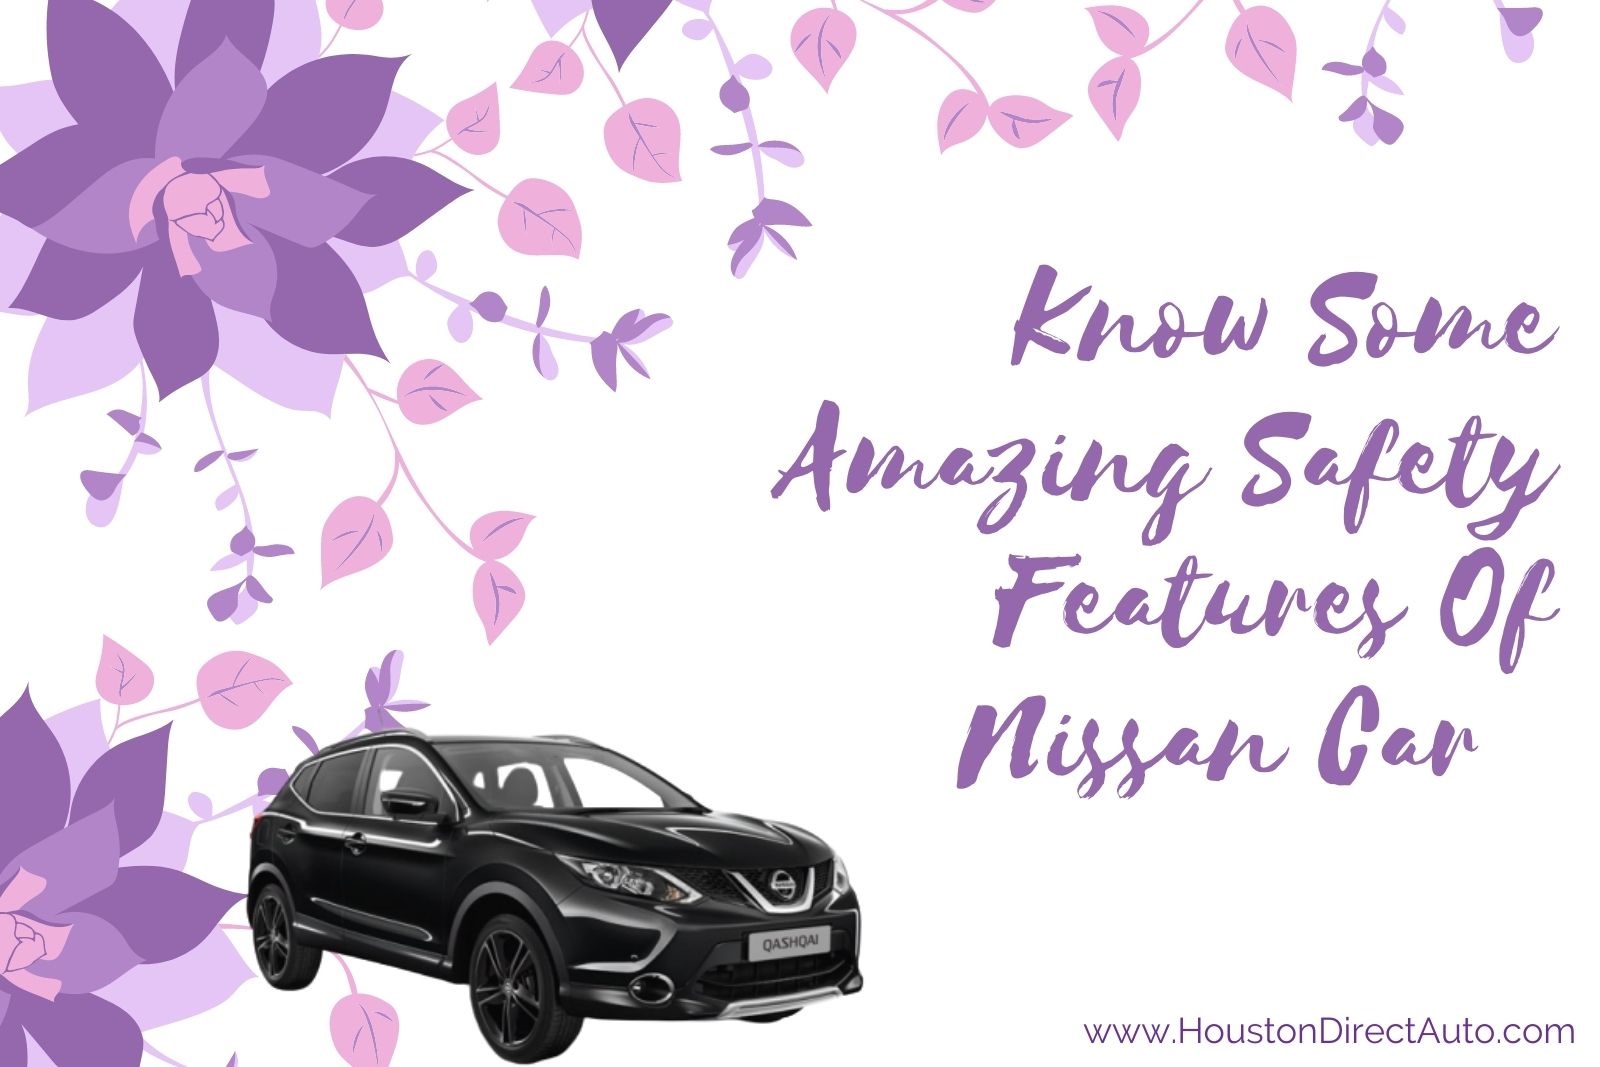 Know Some Amazing Safety Features Of Nissan Car